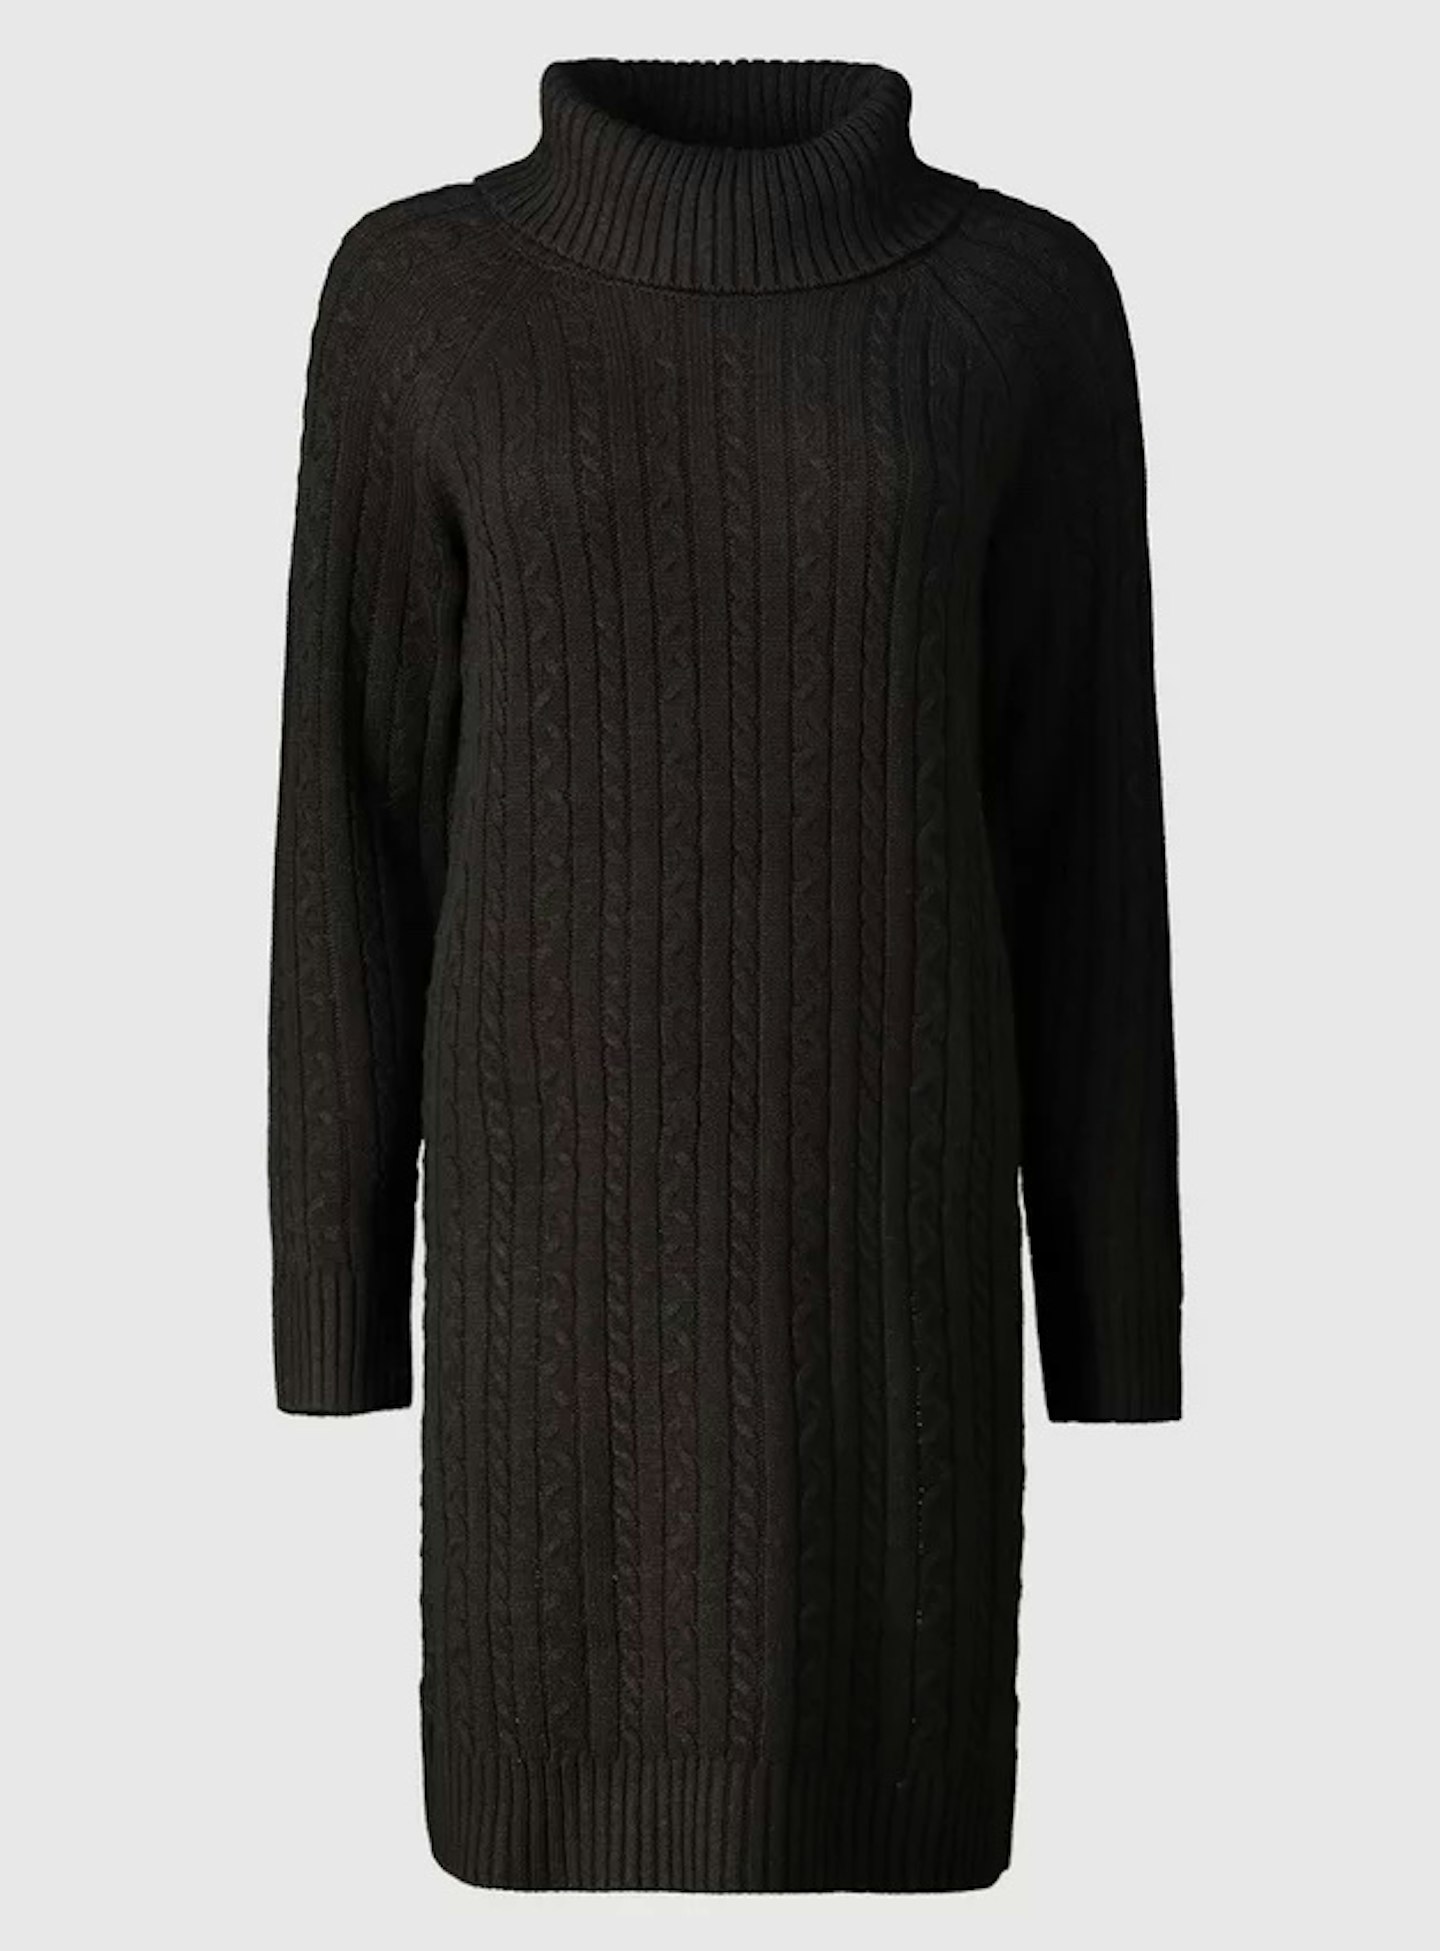 Black Cable Knit Soft Touch Roll Neck Jumper, 20